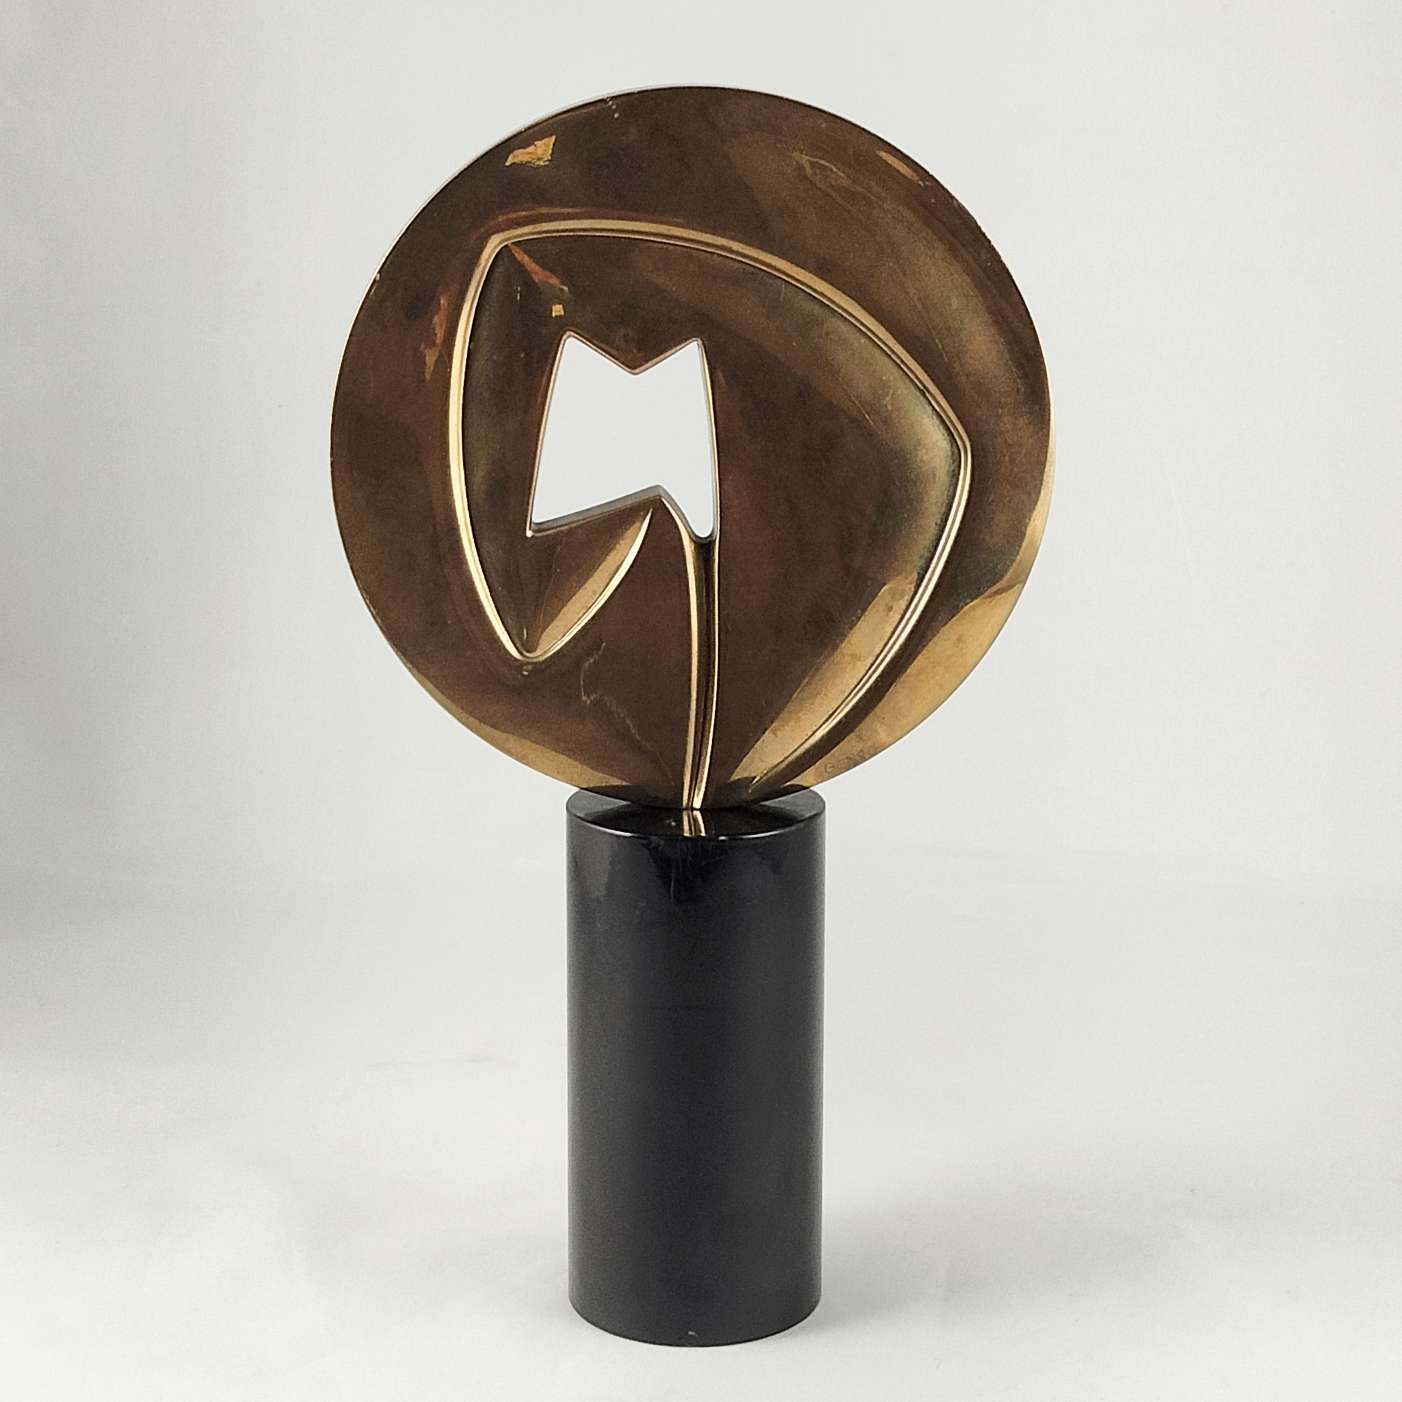 Brass and Marble Sculpture by Spanish Artist Joaquin Berao